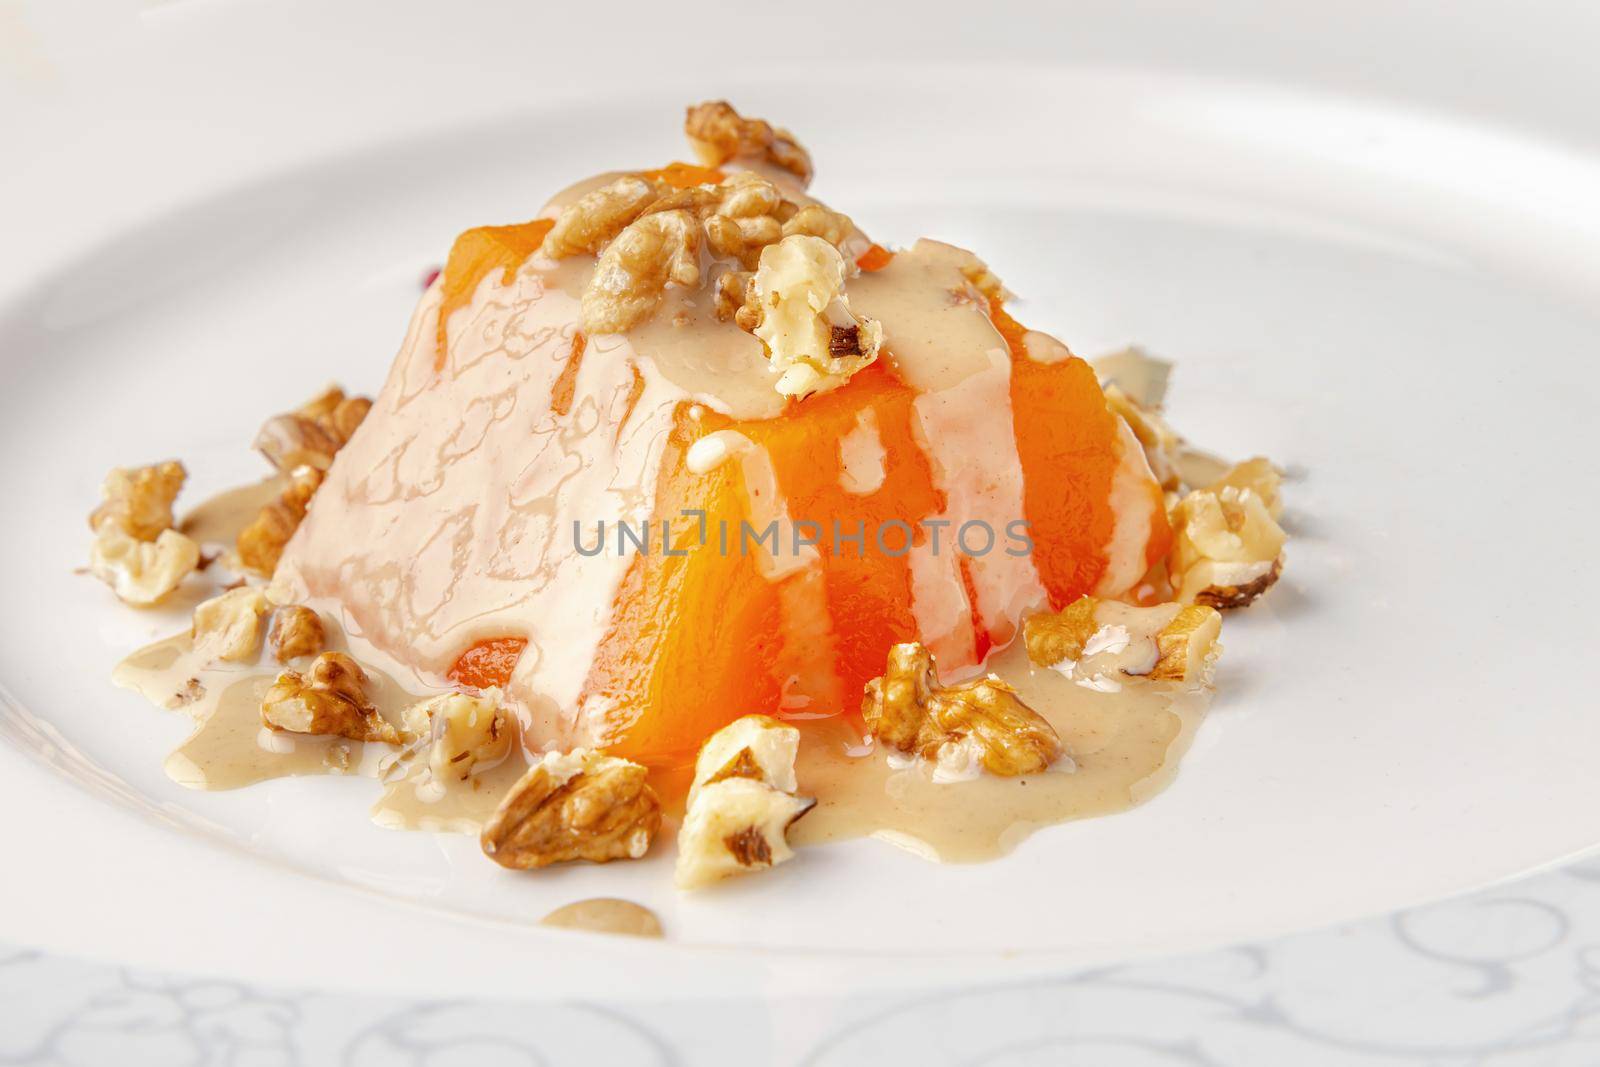 Traditional pumpkin dessert with tahini and walnuts on a white porcelain plate